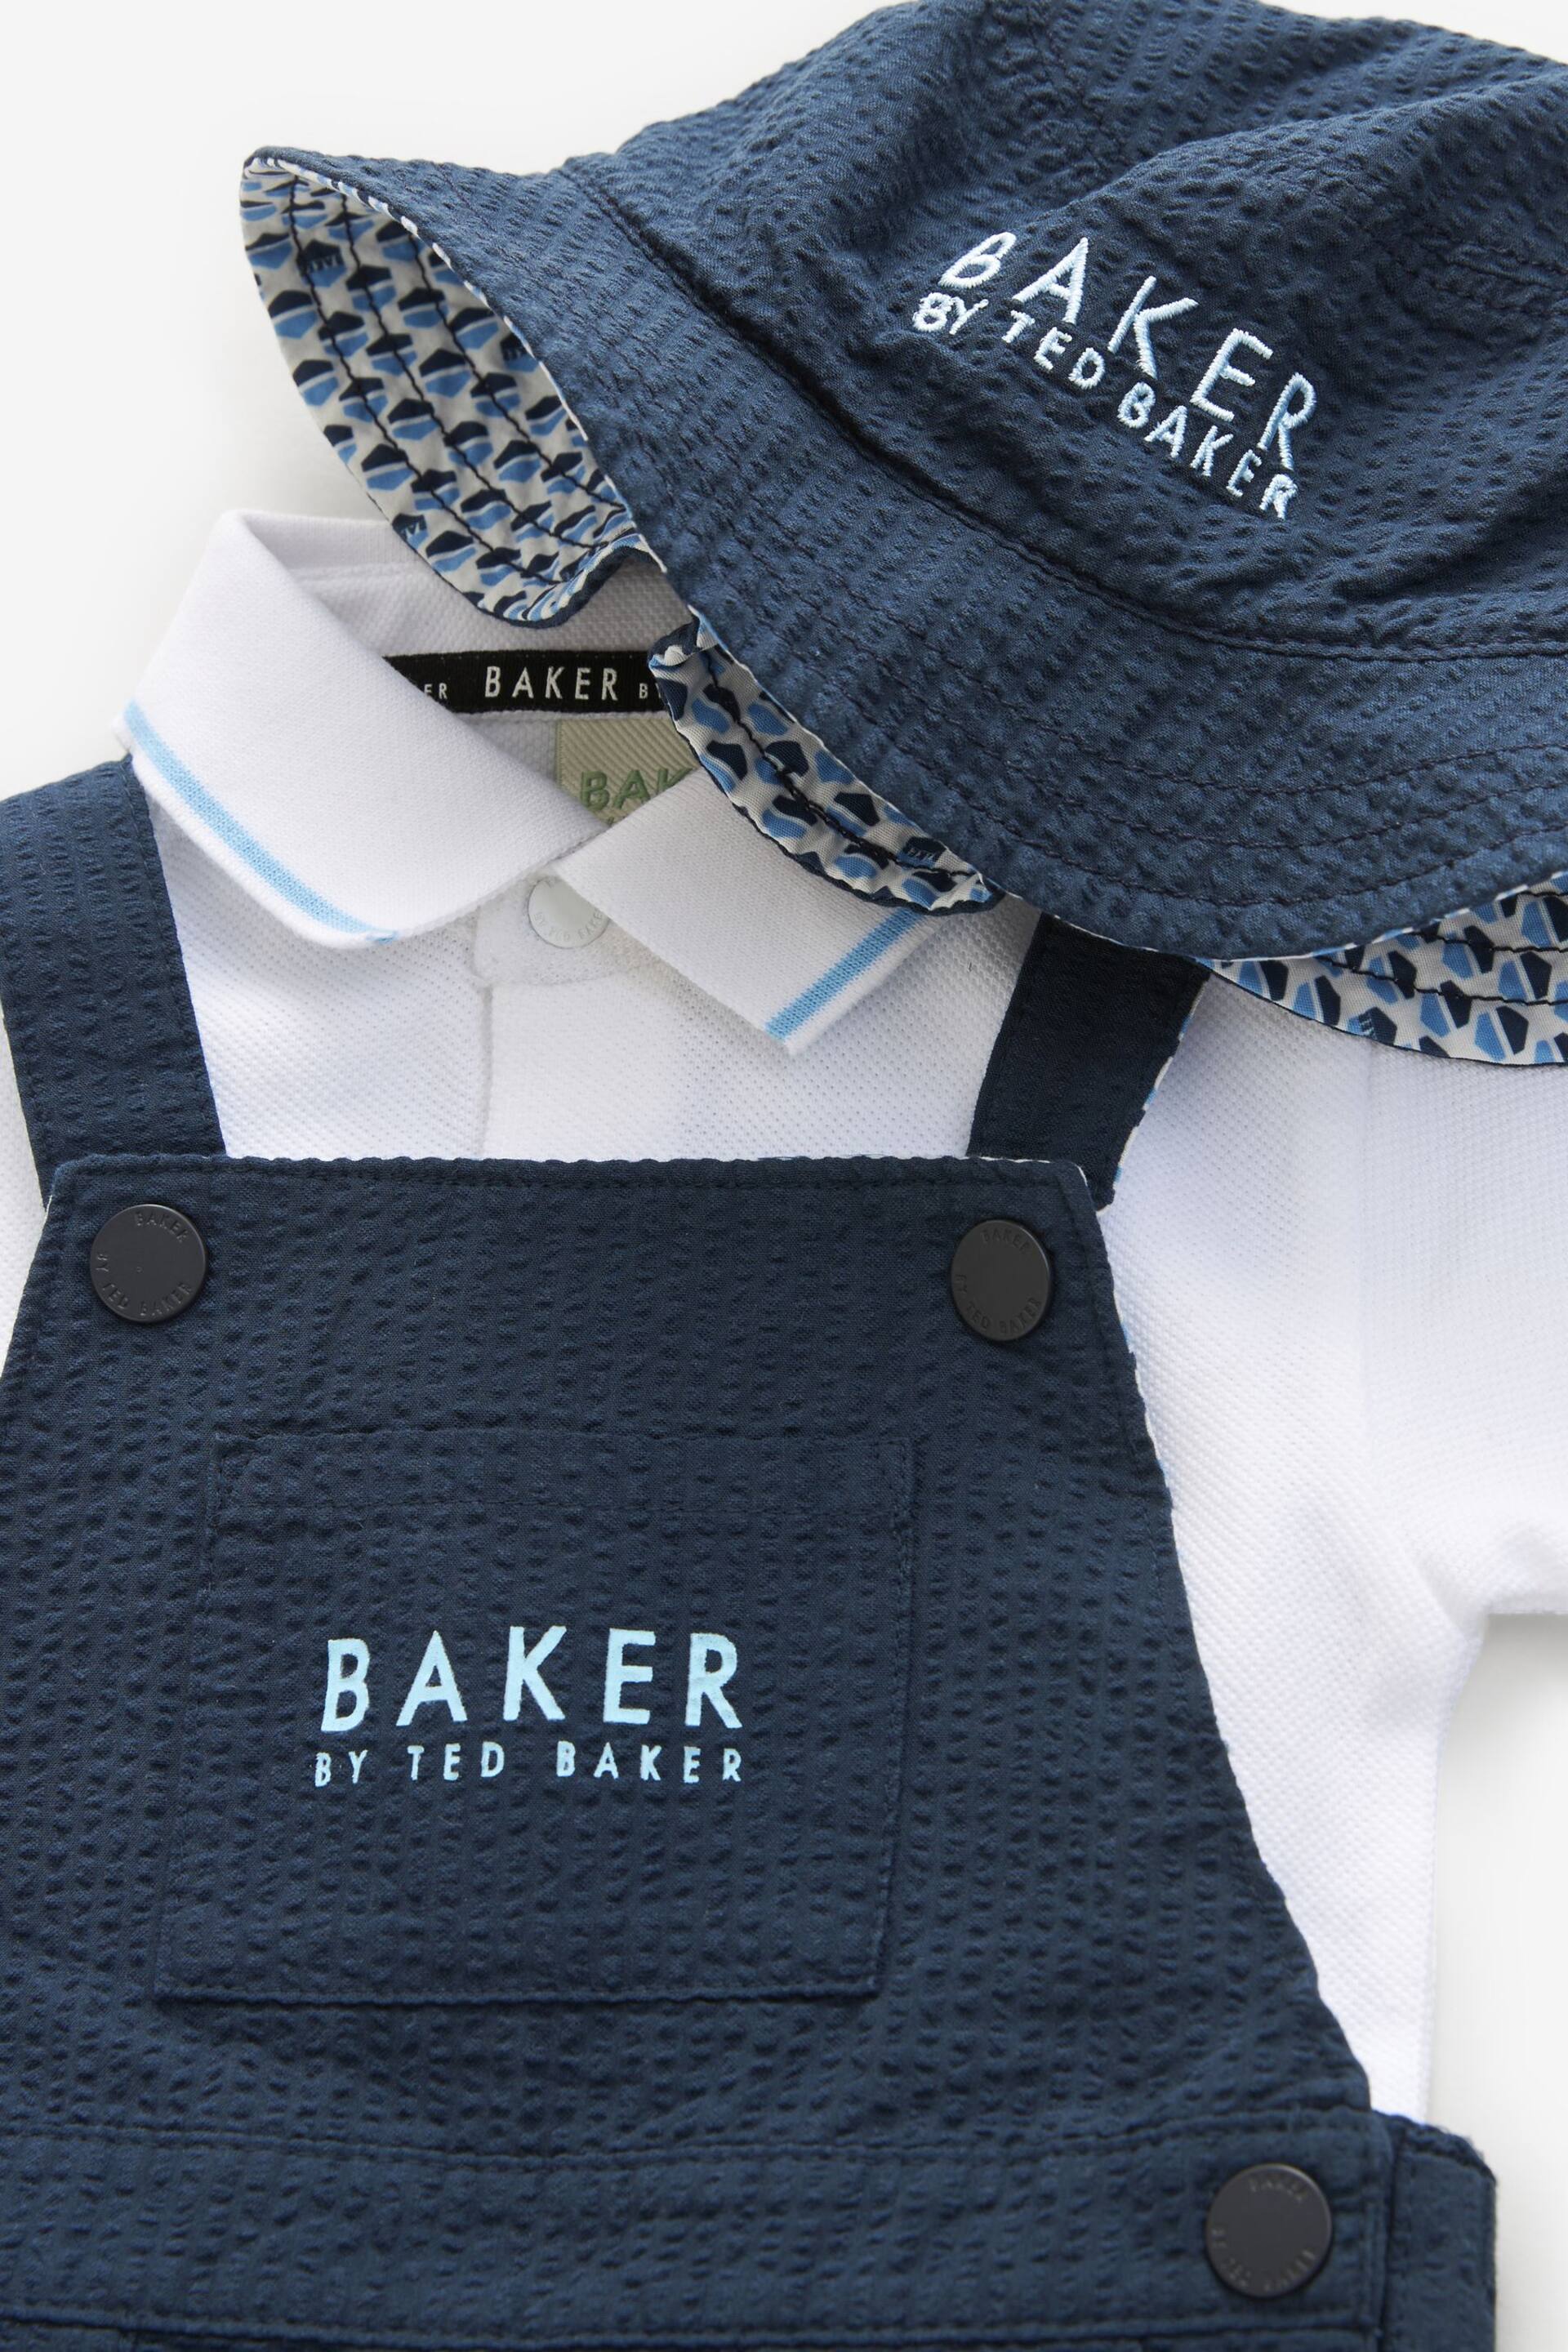 Baker by Ted Baker Seersucker Dunagrees, Polo and Hat Set - Image 11 of 13